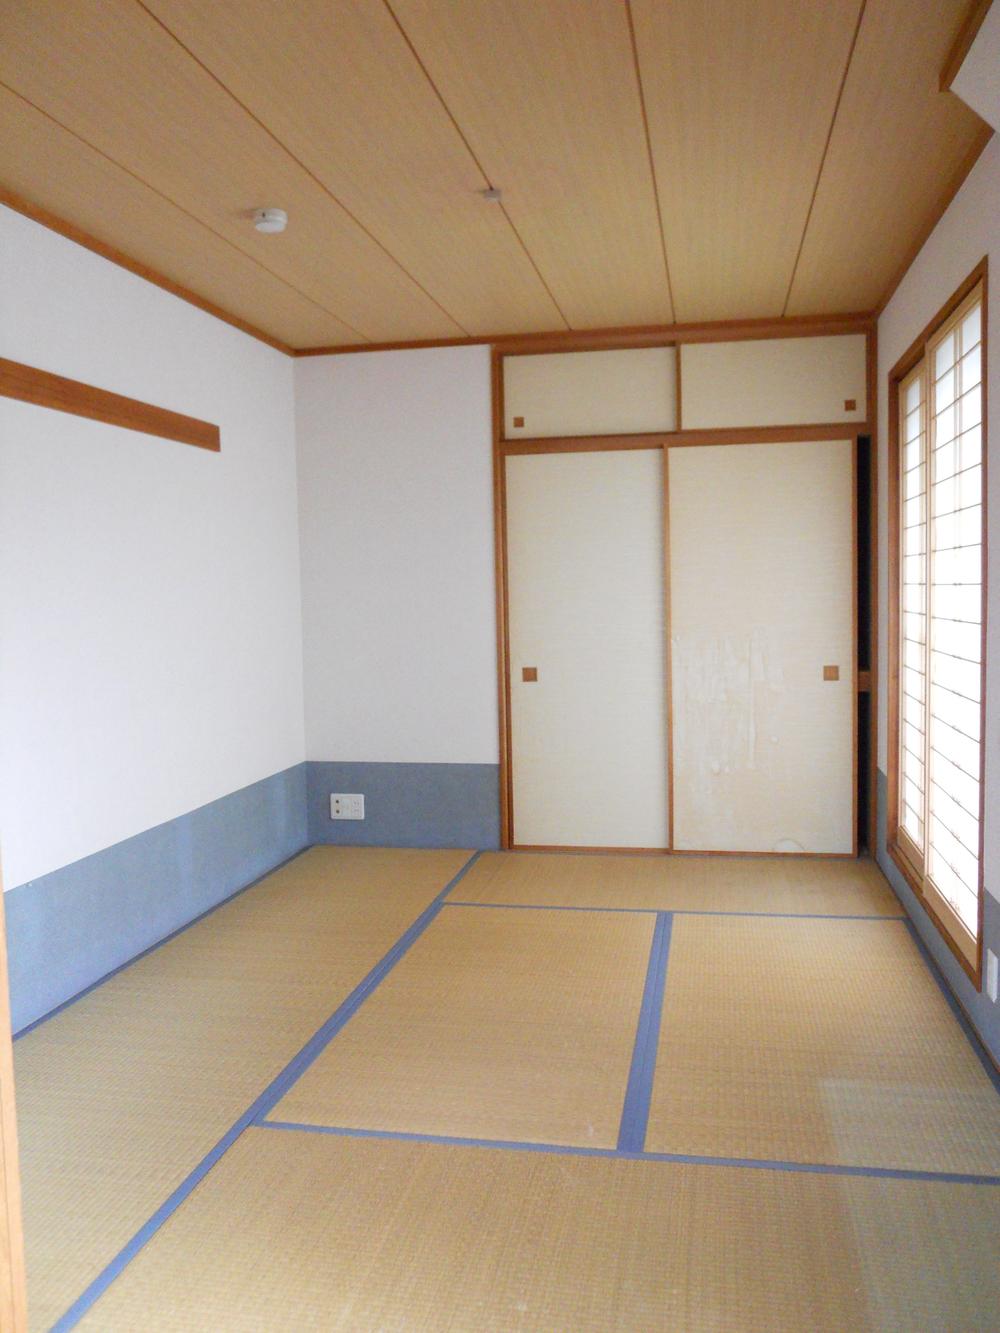 Non-living room. Japanese-style room (approximately 6.0 tatami mats)